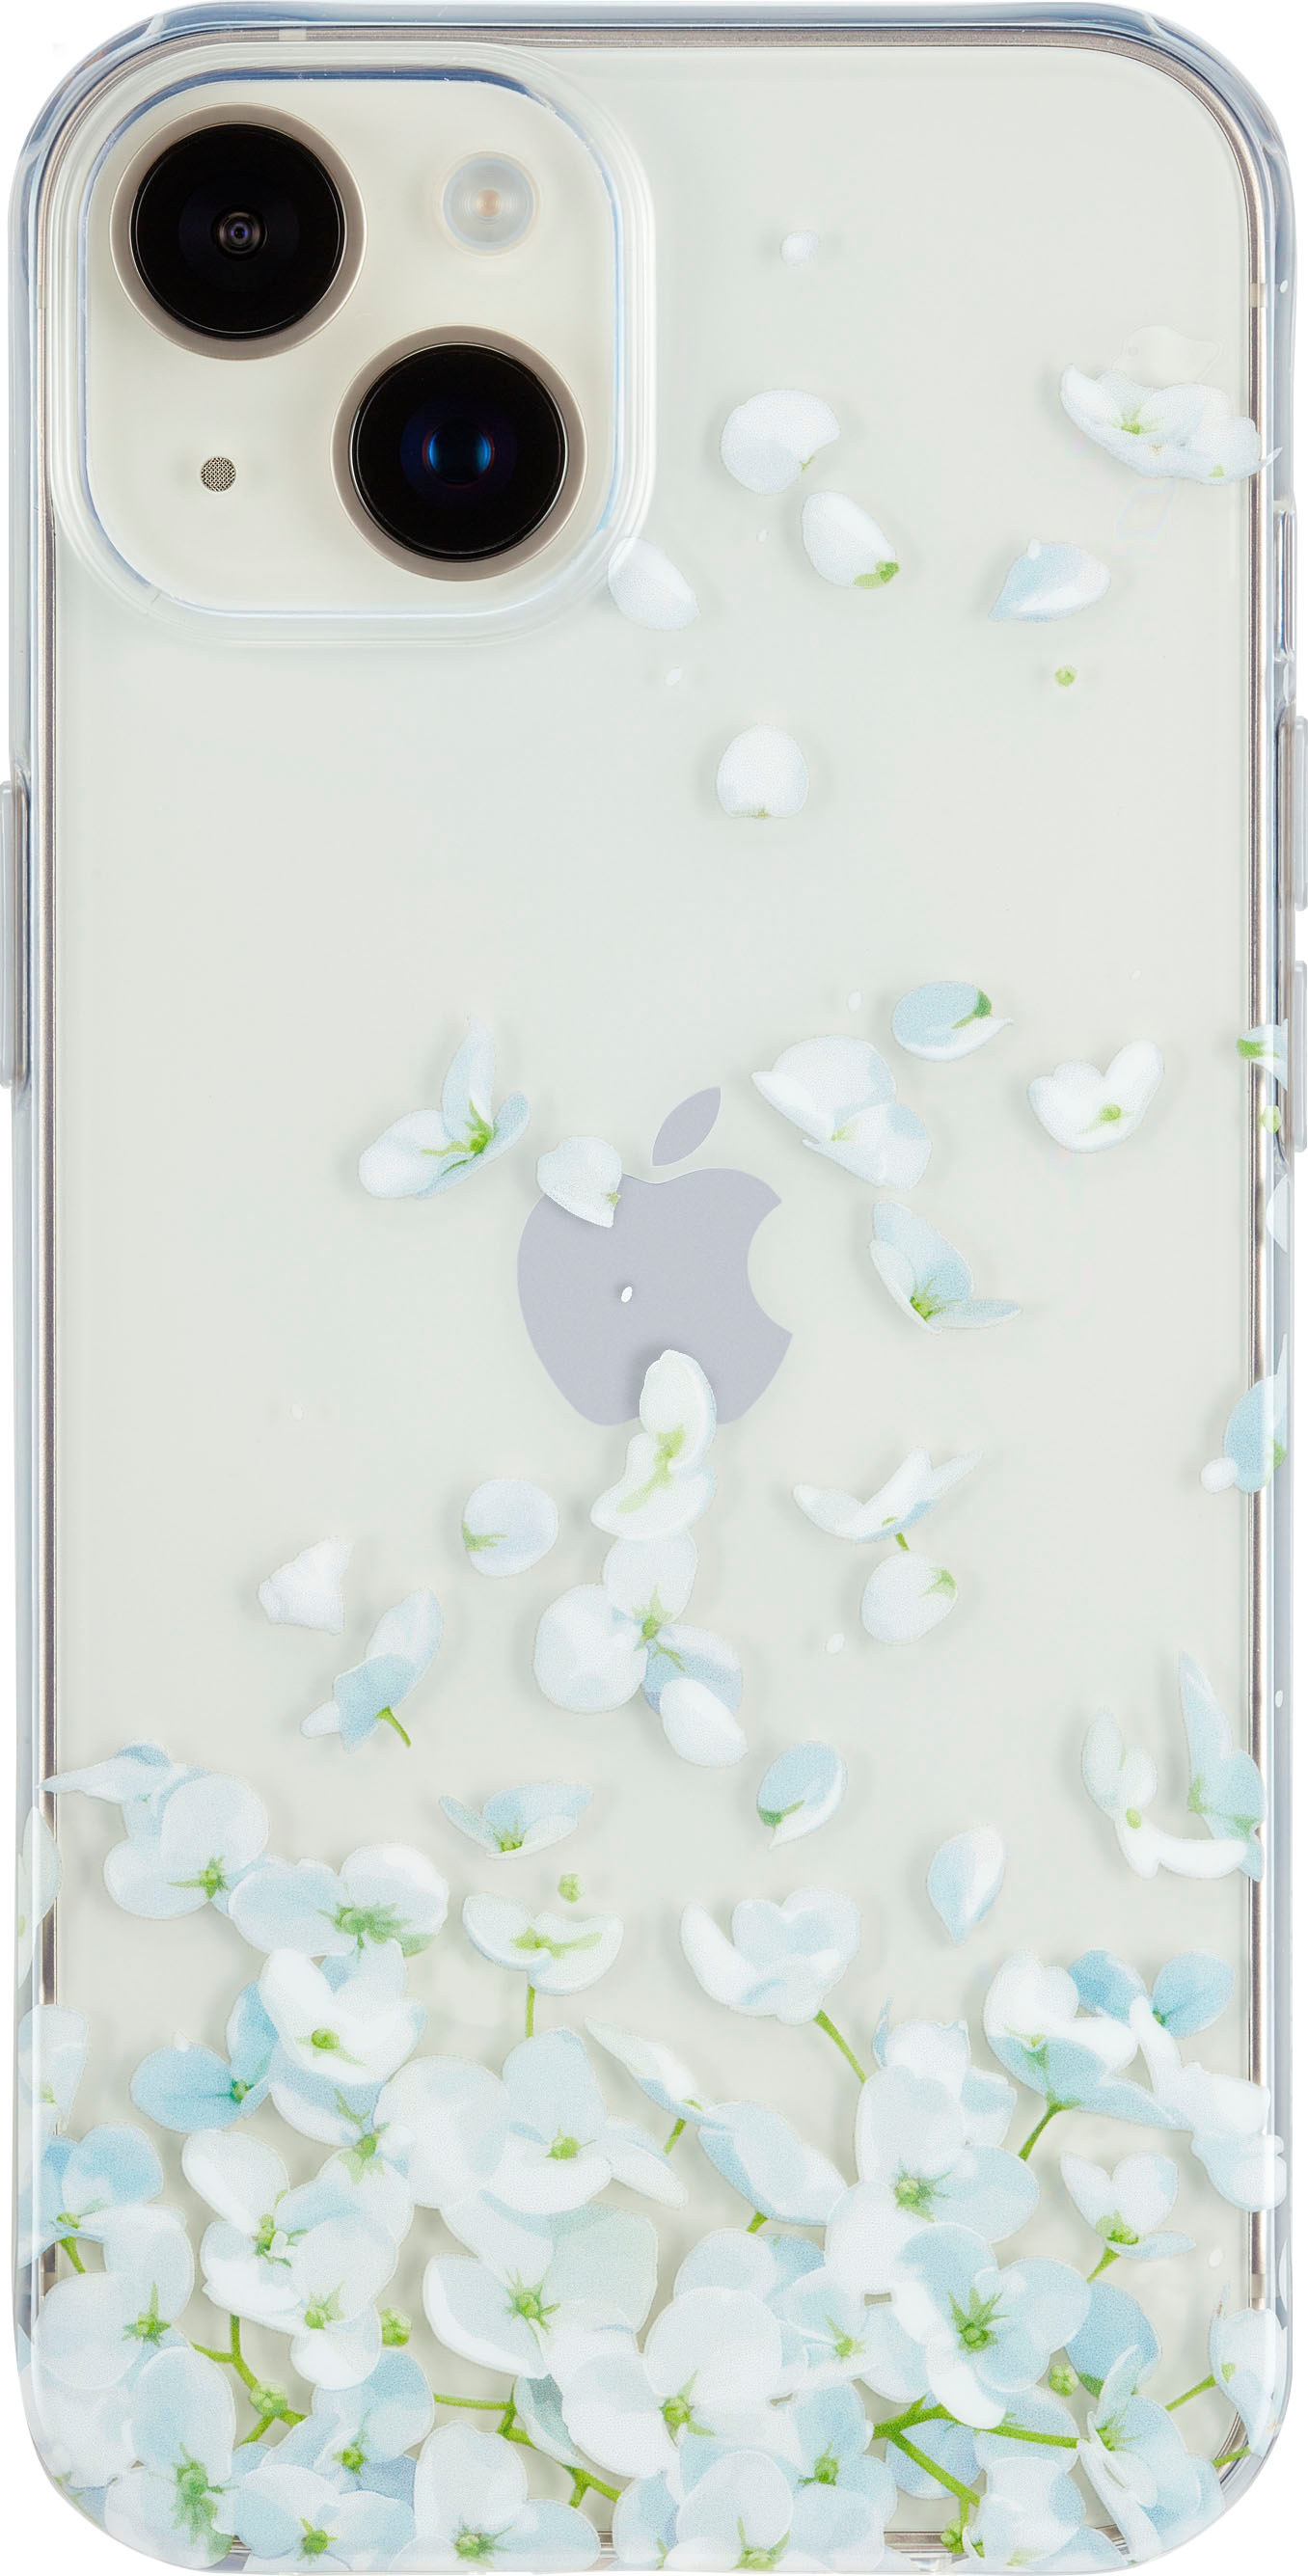 Candy-colored transparent shell with rounded edges for iPhone – Paprikase